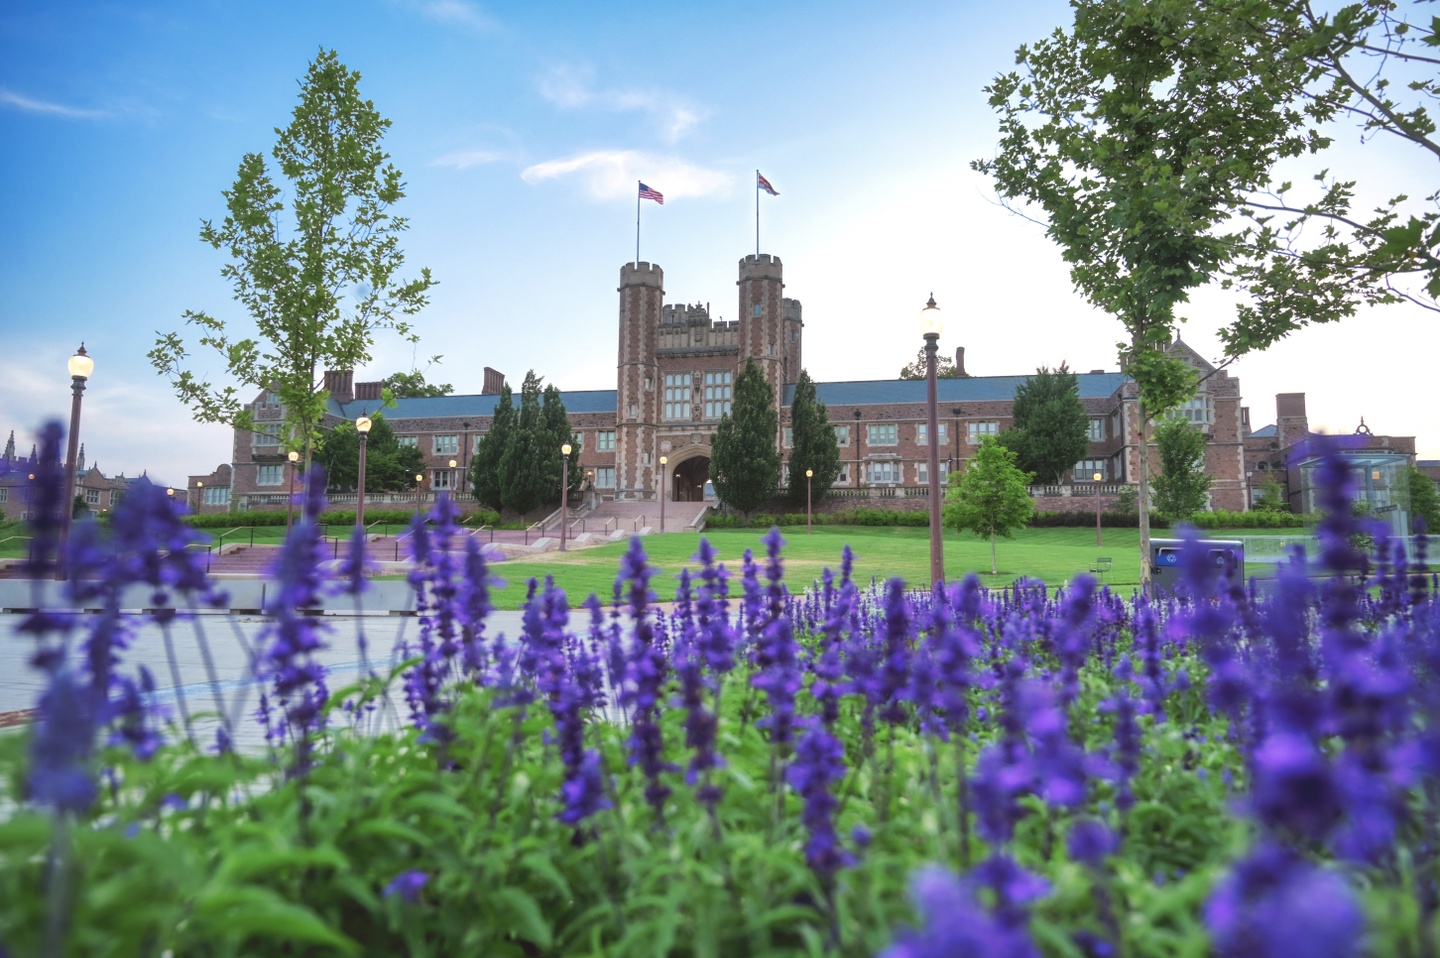 Collegiate Gothic-style building, Brookings Hall, in the background,with purple flowers with green foliage and a couple of trees in the foreground.